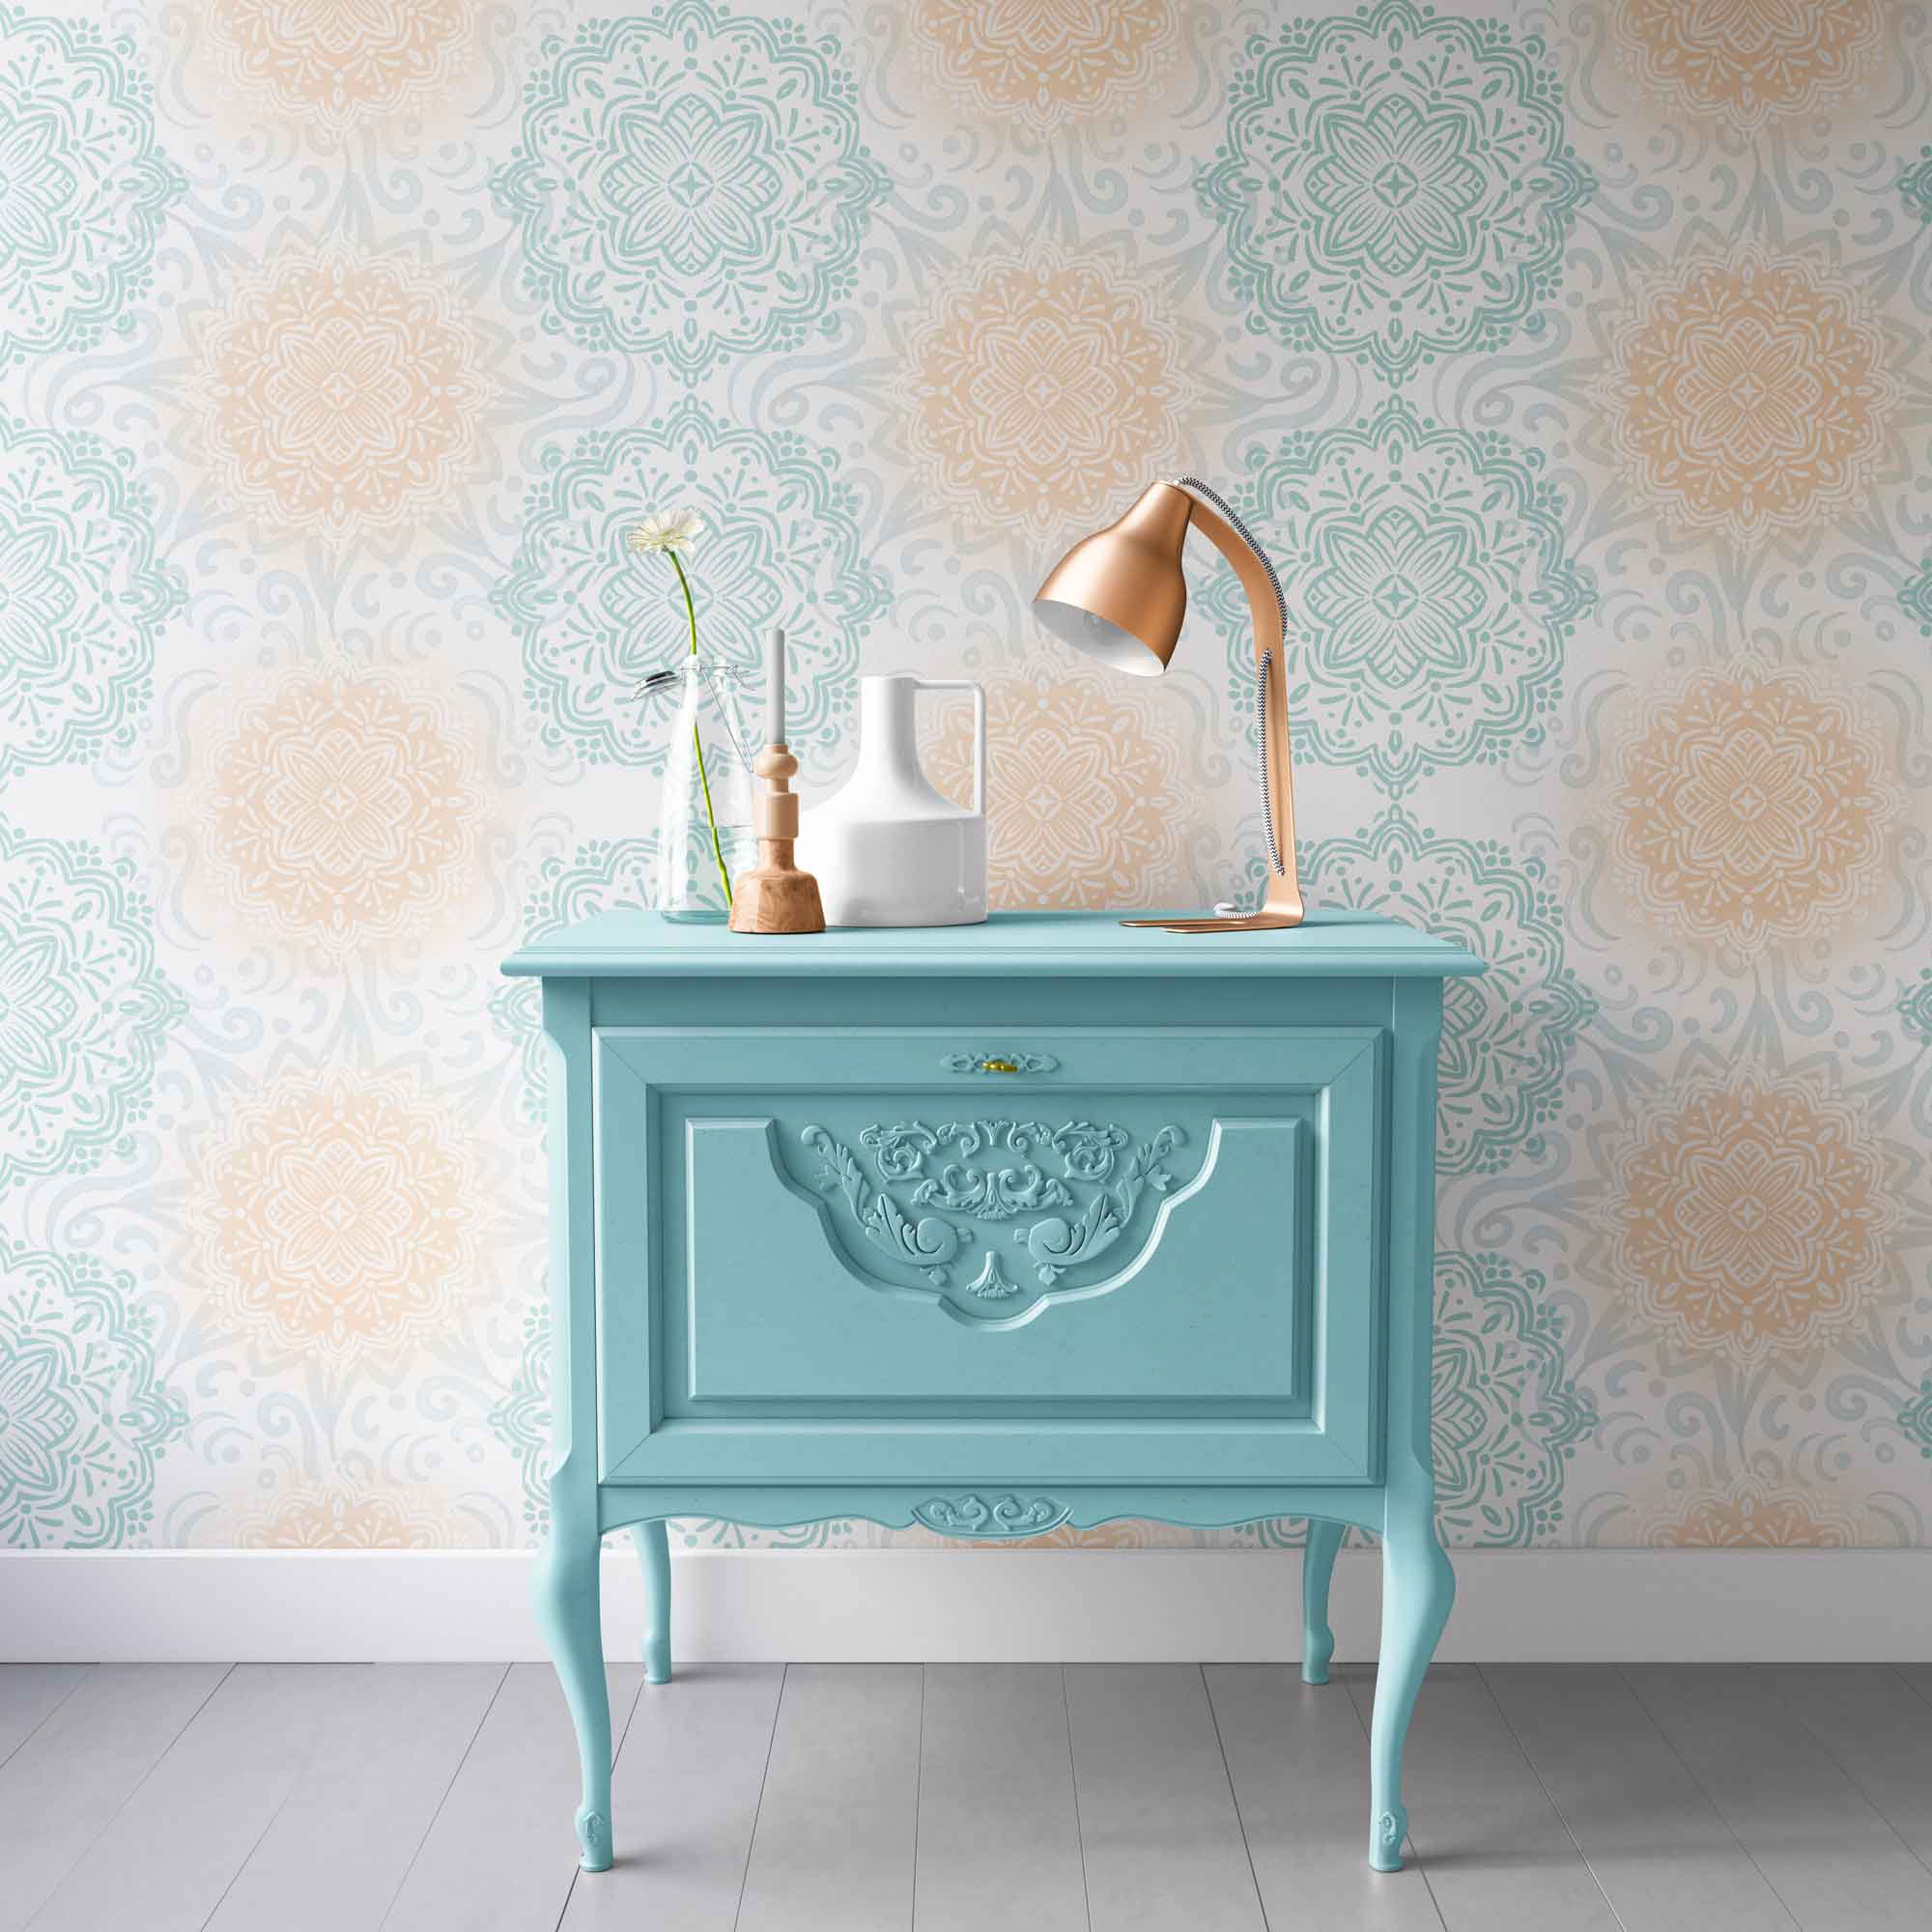 Boho Hand-drawn Mandalas in Pastel Aqua and Peach Removable Peel & Stick and Pre-Pasted Wallpaper Hallway example